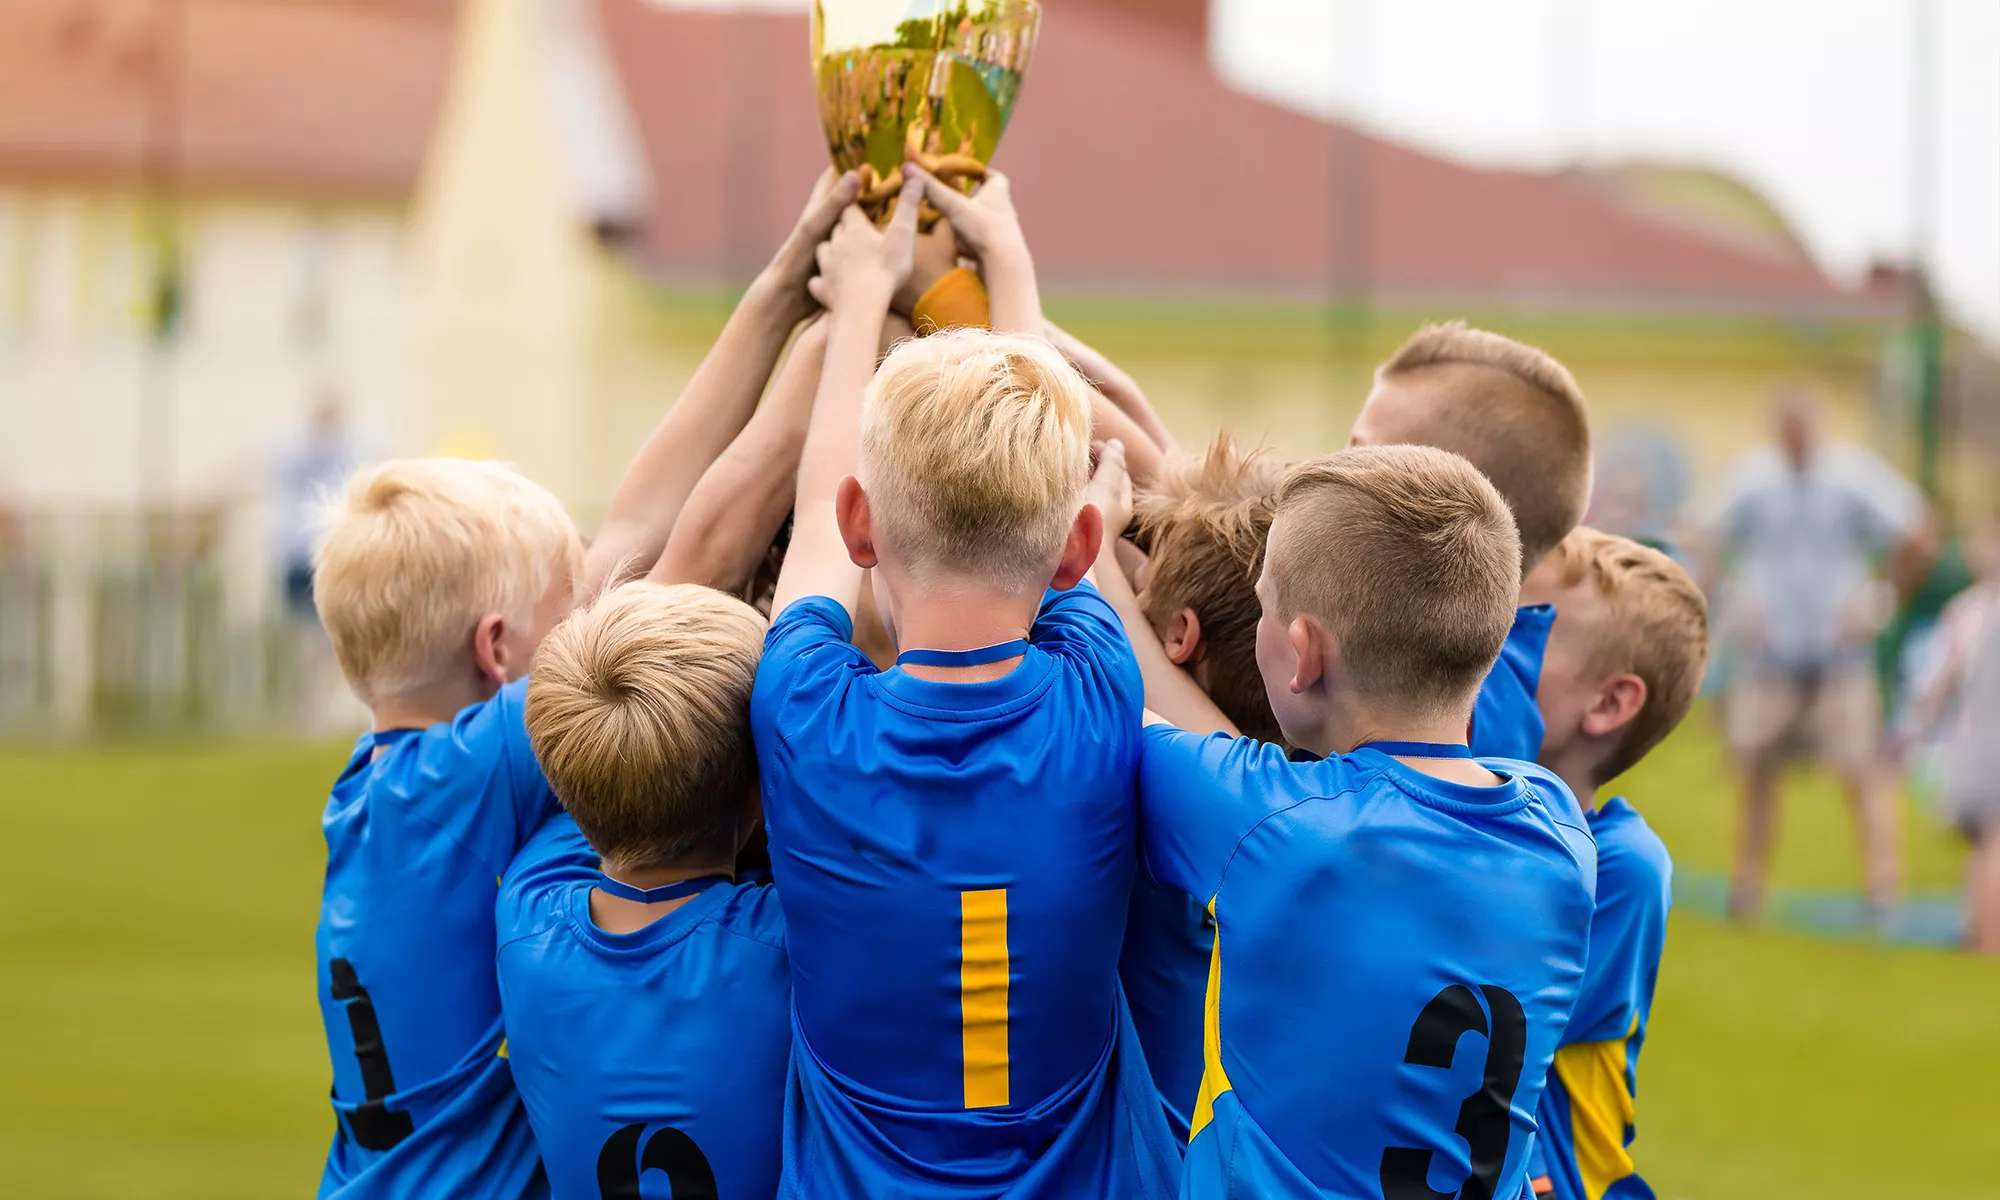 Sports Team Travel Planning Tips for Parents